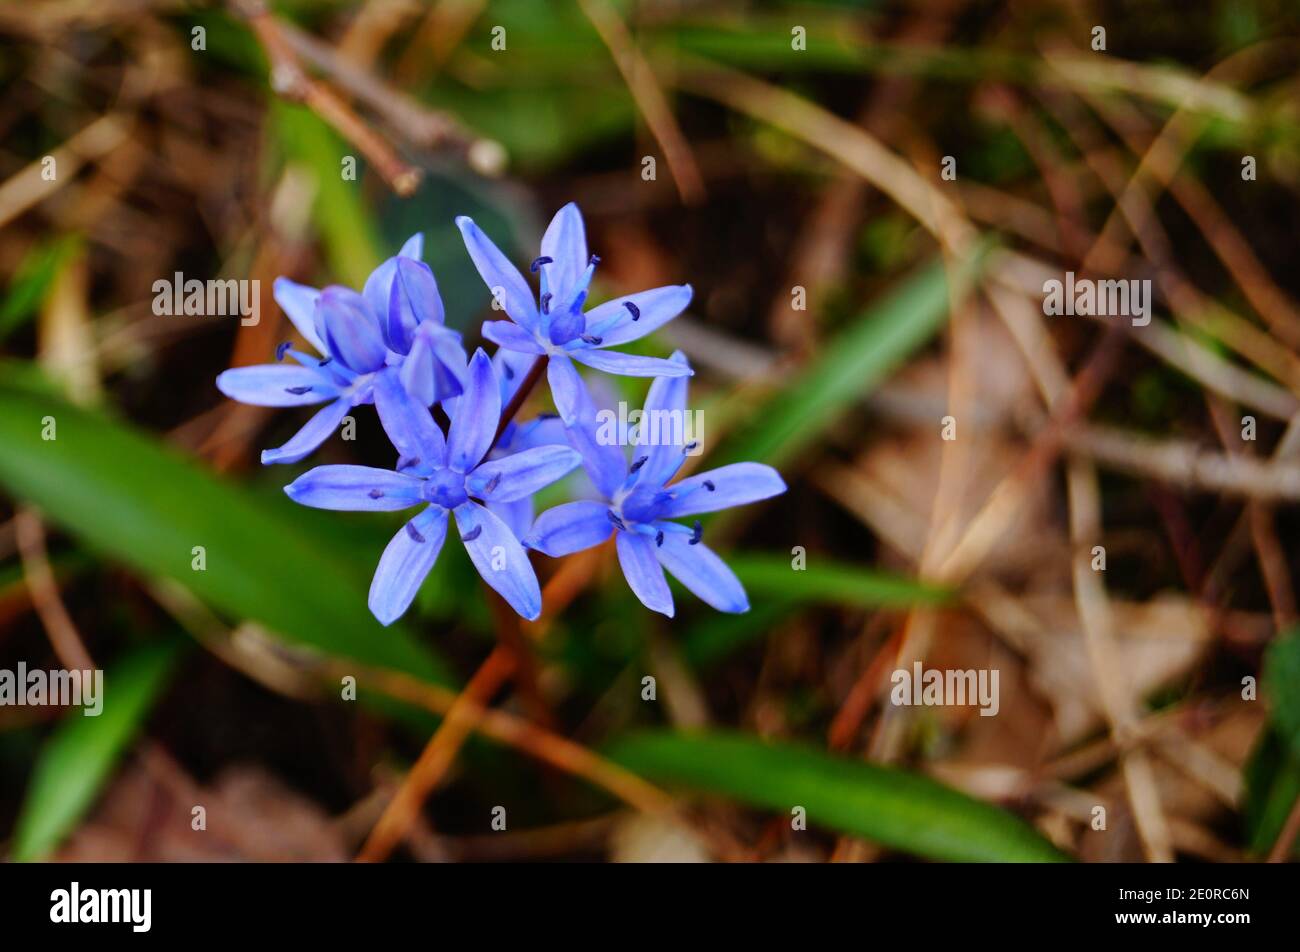 Scílla flowers with delicate blue petals on a stem with green leaves in a meadow on a sunny spring day Stock Photo